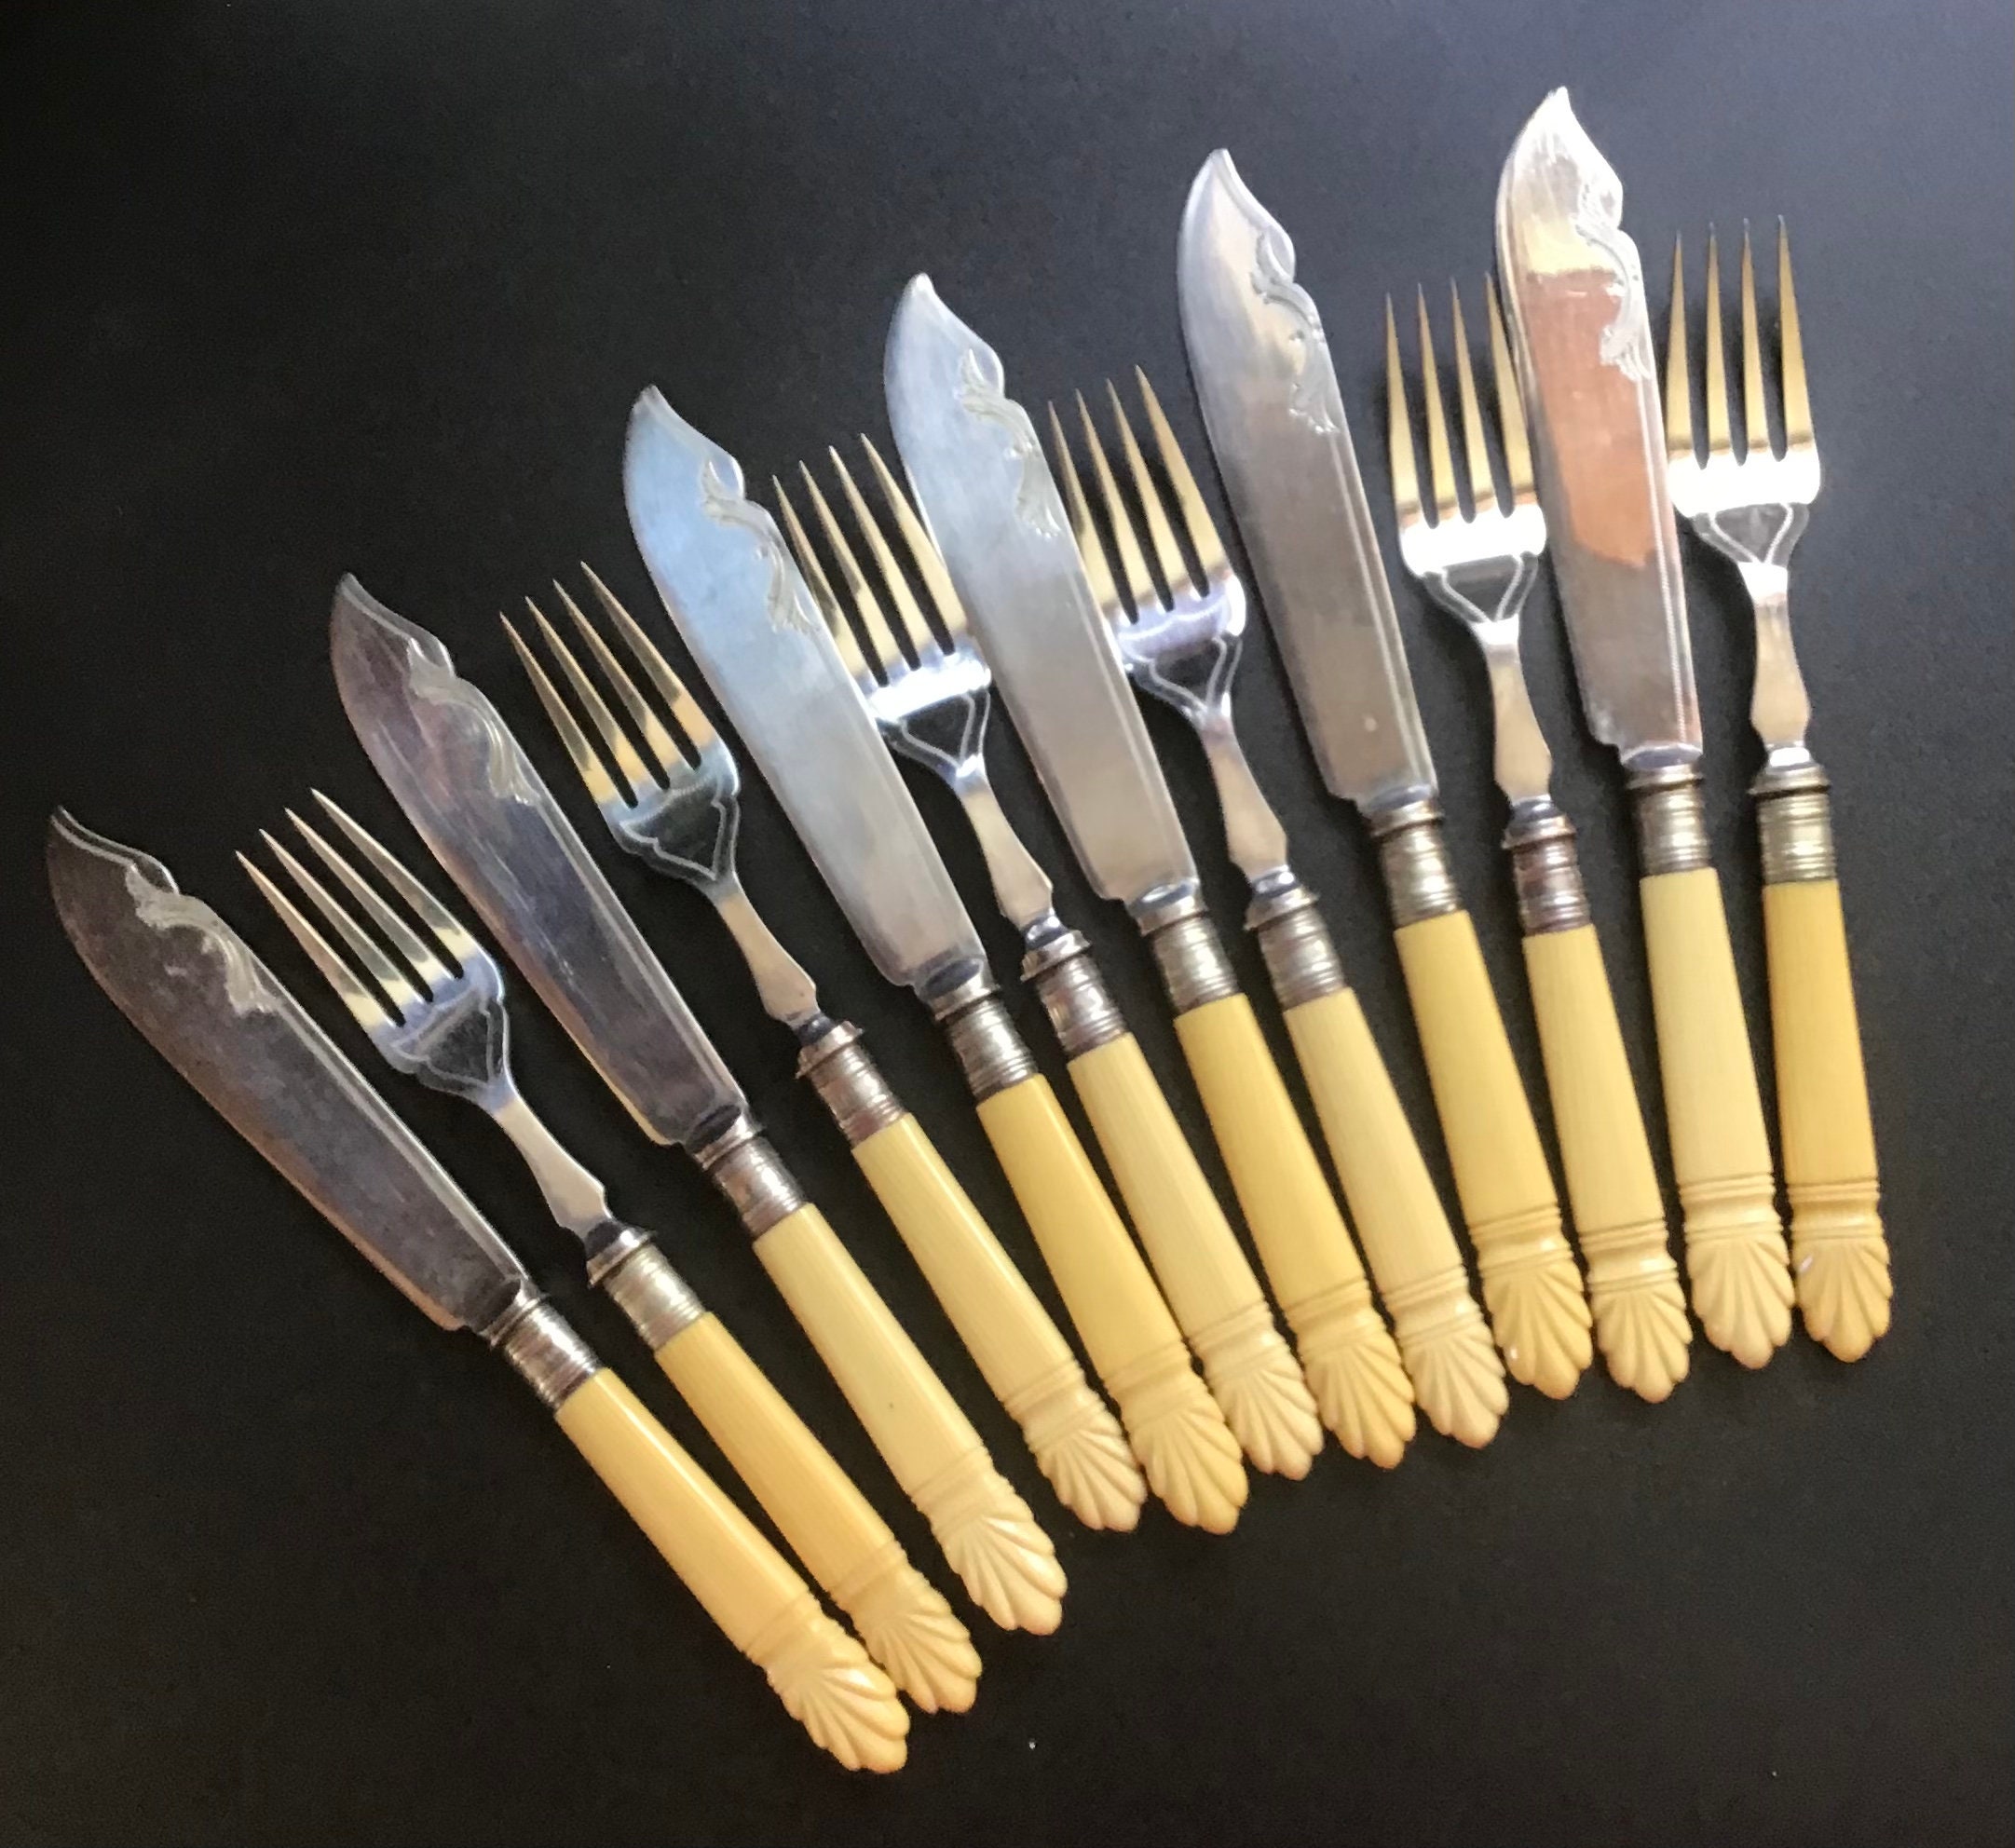 Vintage Fish Forks and Fish Knives set of 12 Celluloid Art Deco Handles